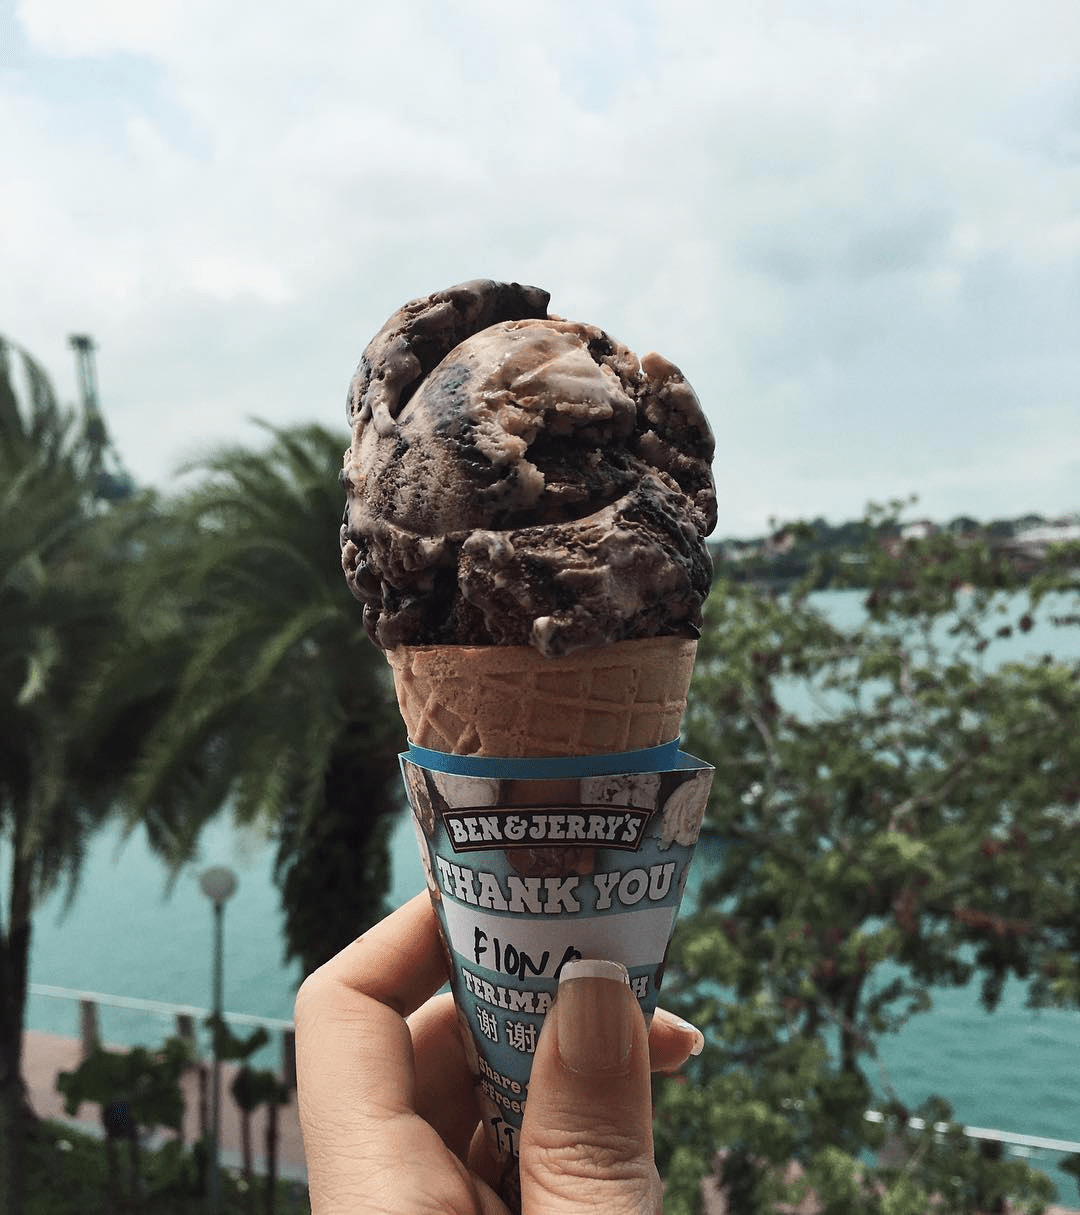 Ben and Jerry free cone day - tonight dough